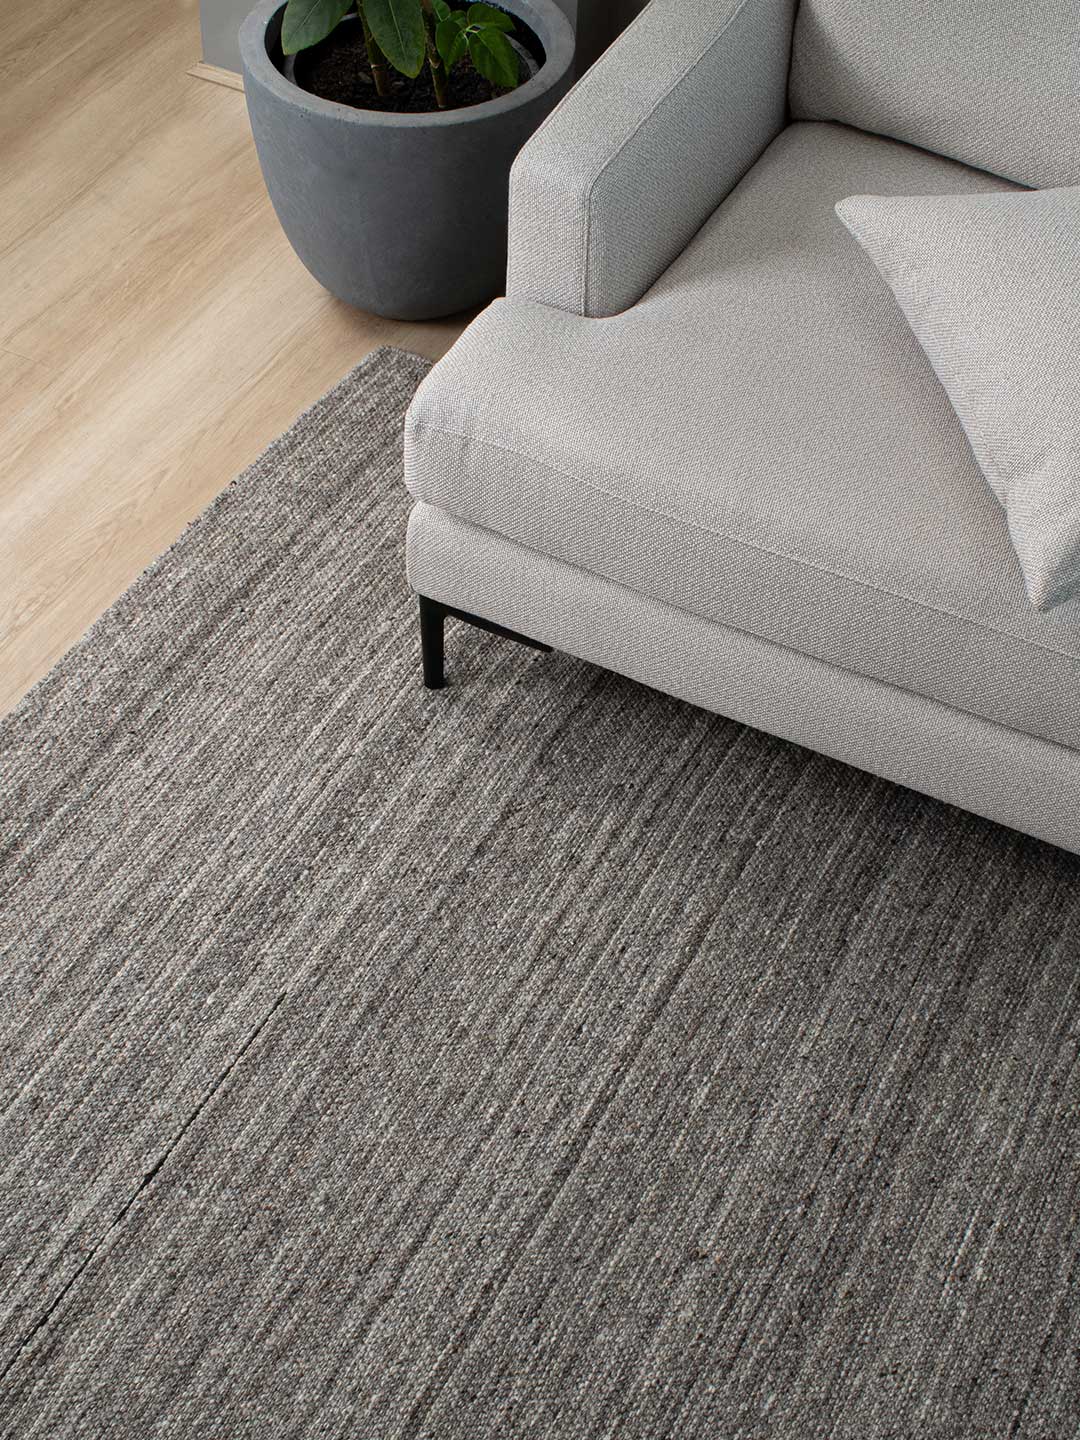 Layla Berber Rug 20% off from the Rug Collection Stockist Make Your House A Home, Furniture Store Bendigo. Free Australia Wide Delivery